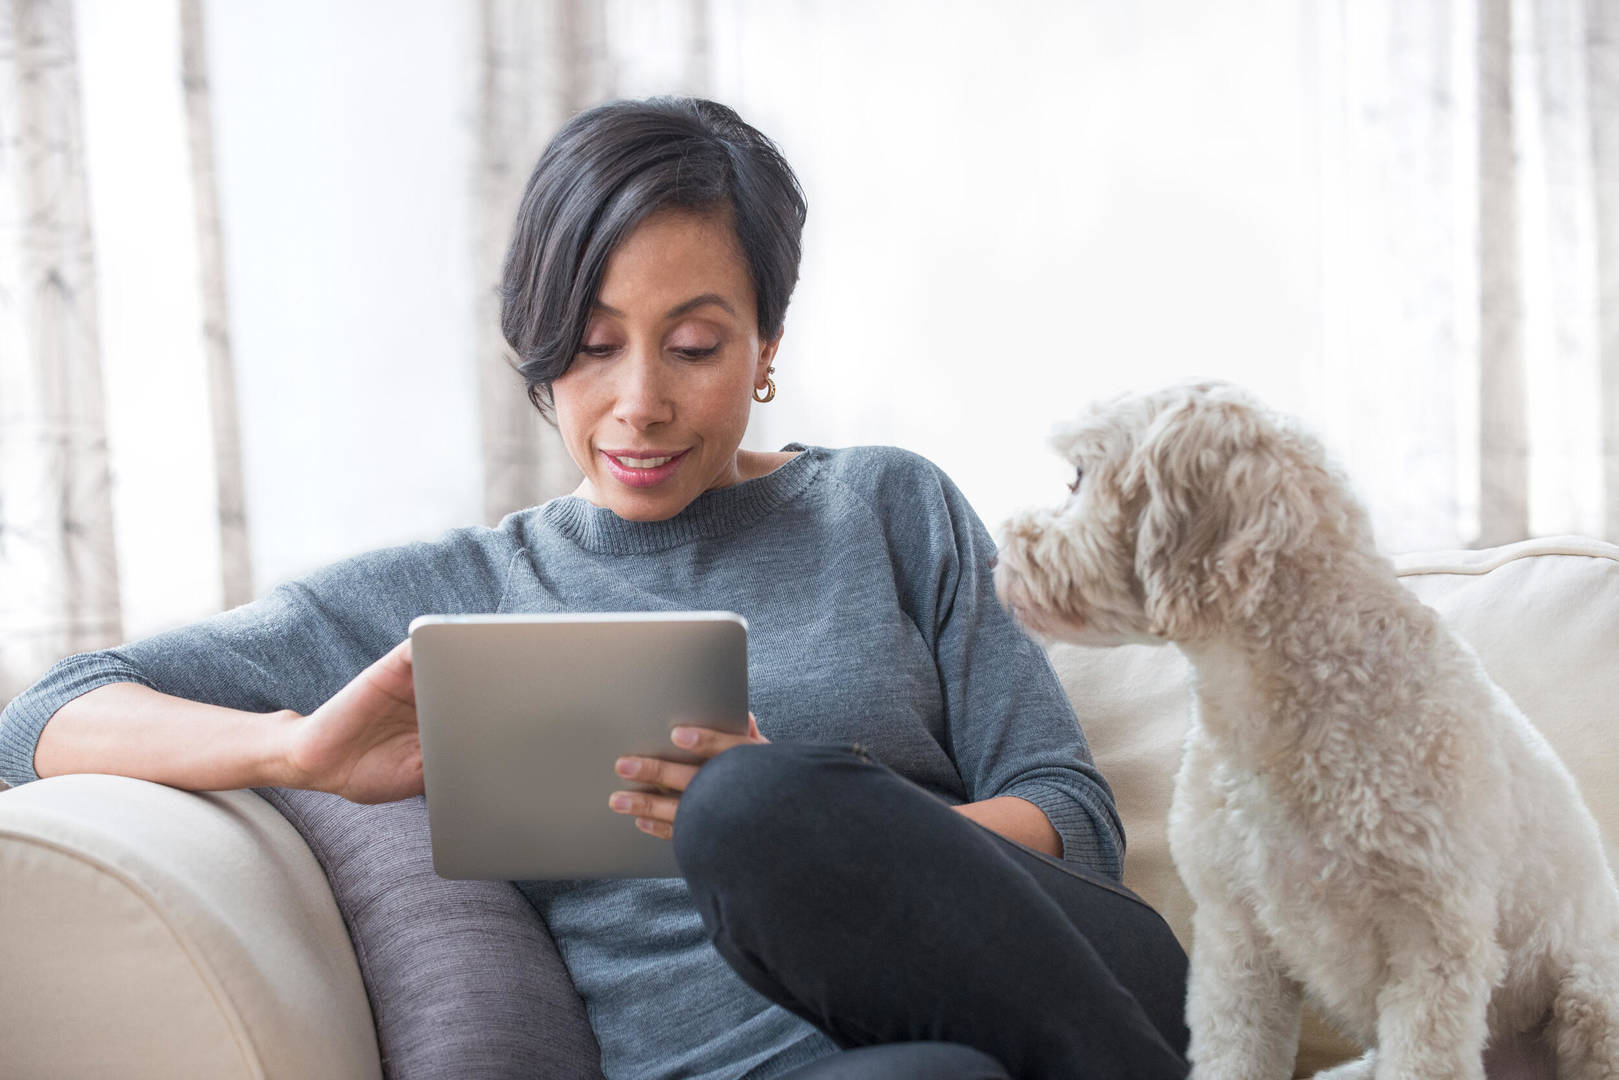 Black woman with small dog looks at tablet